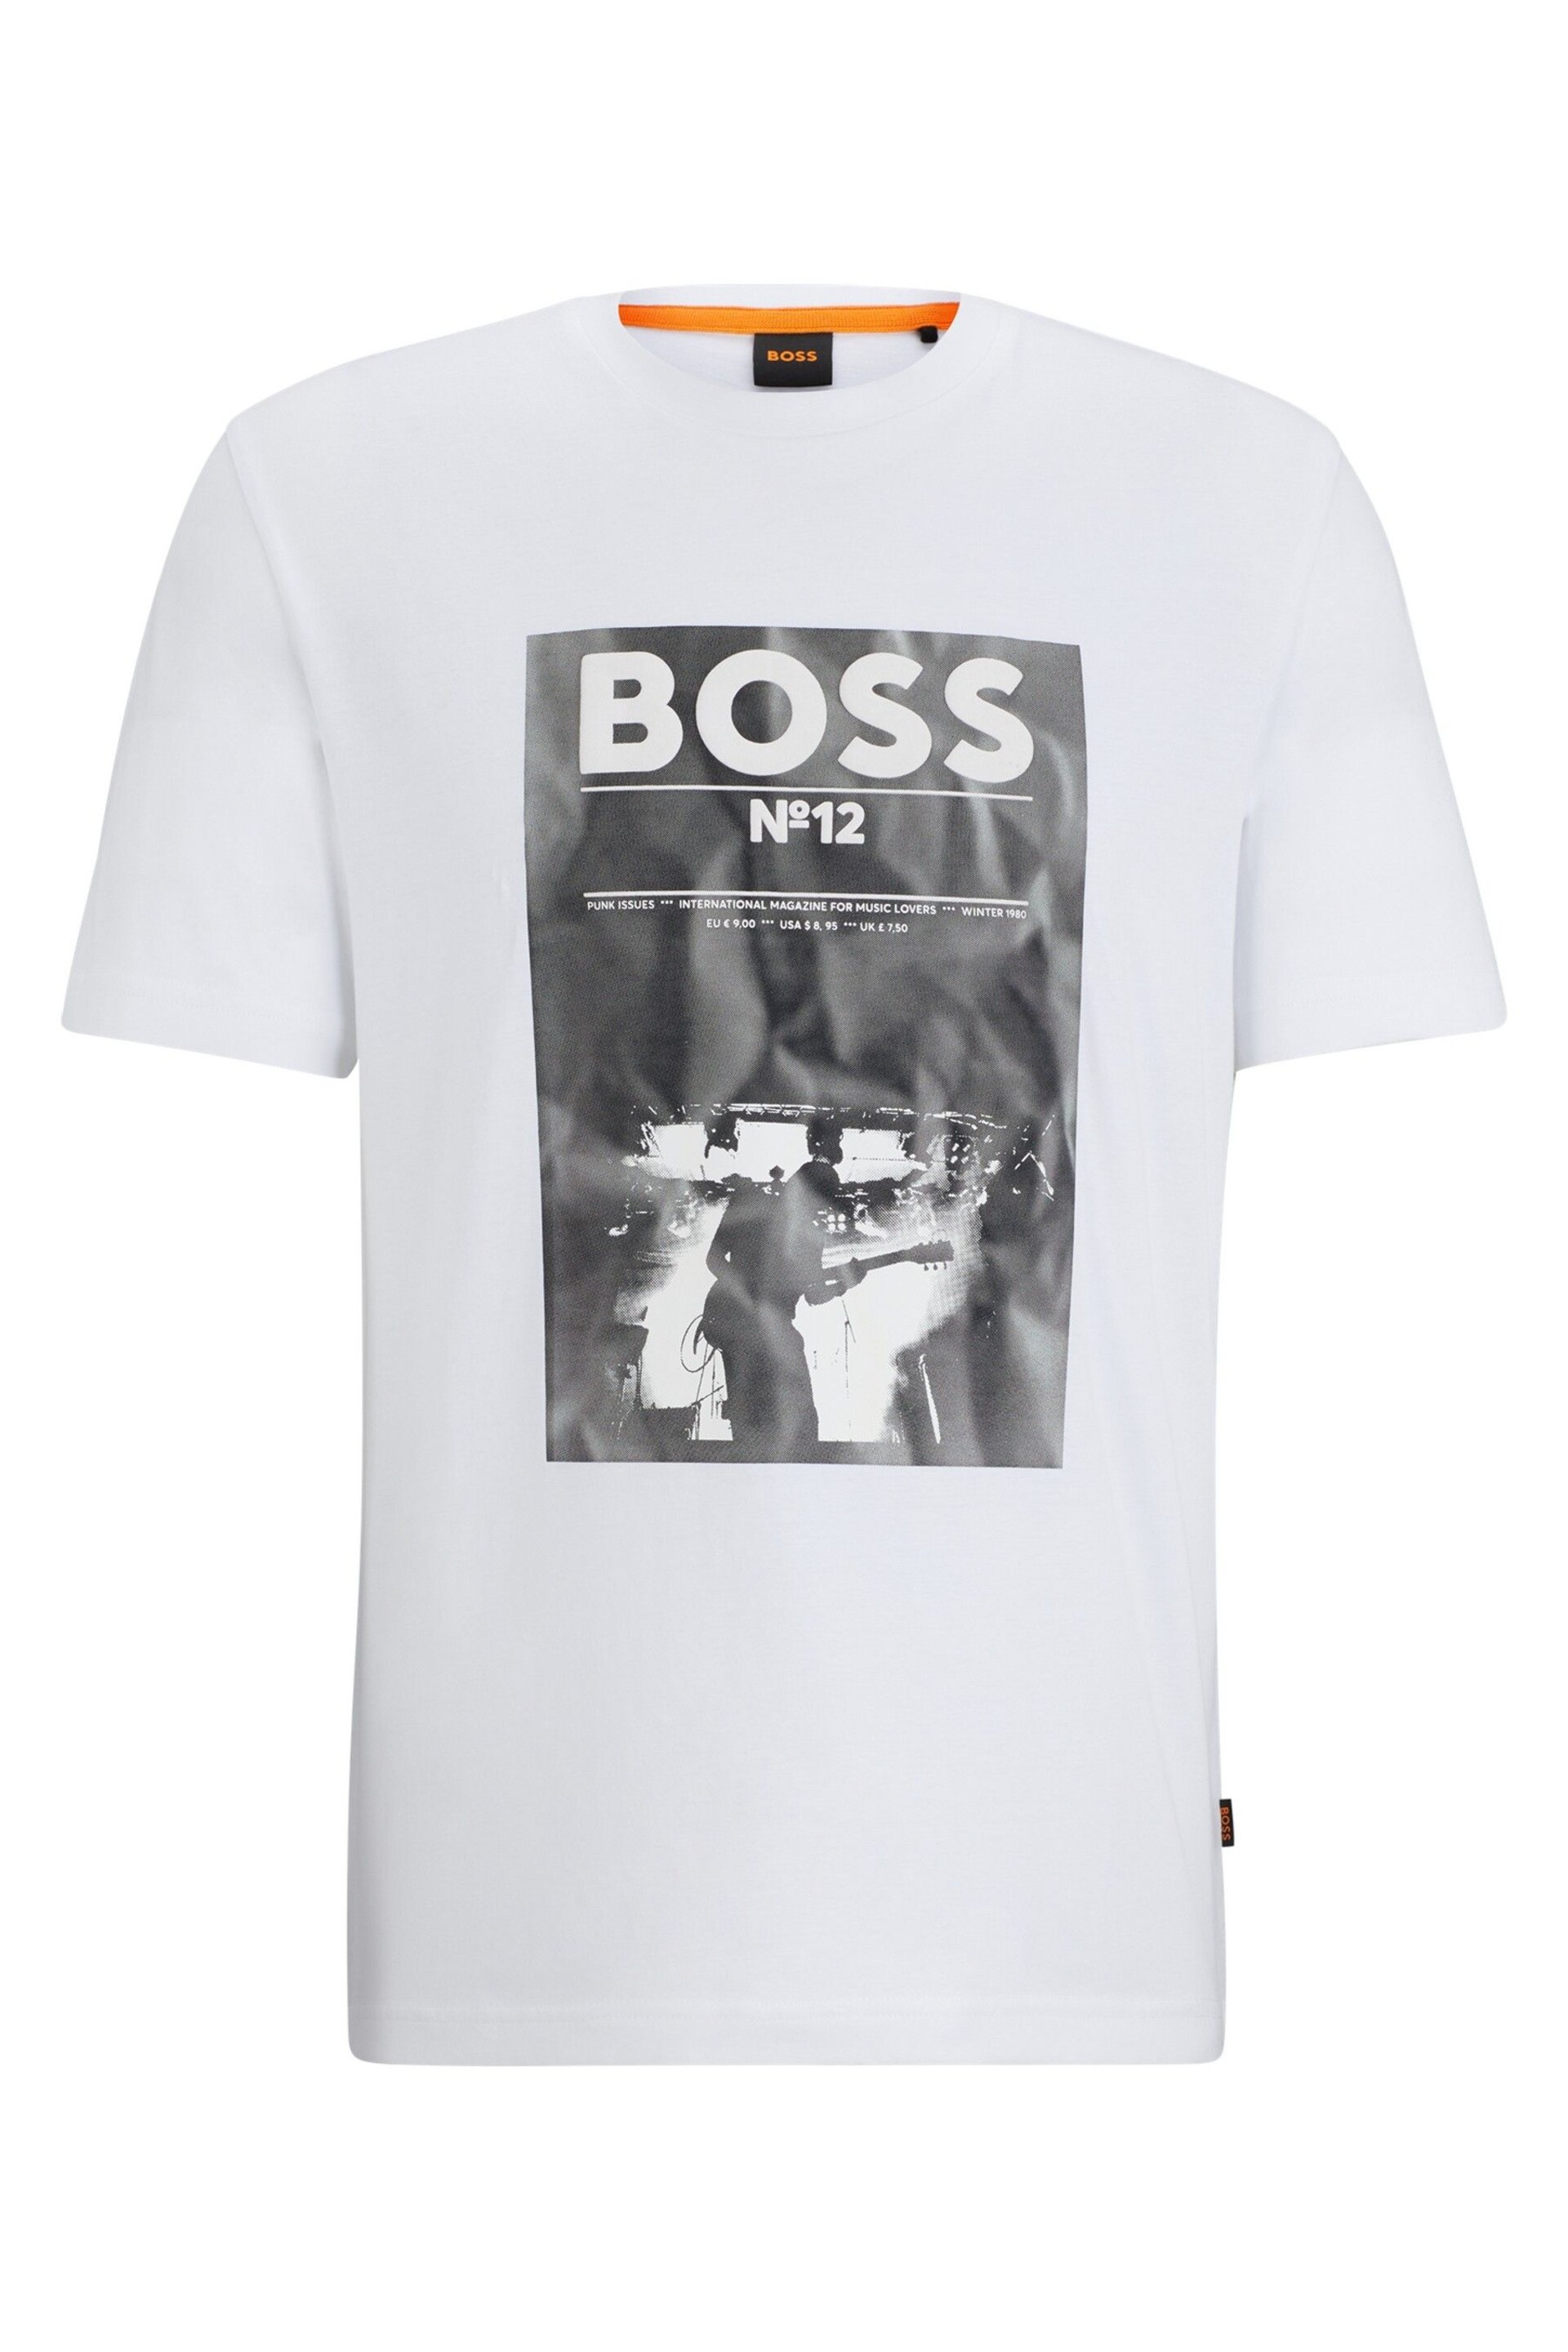 BOSS White Regular-Fit T-Shirt in Cotton With Seasonal Artwork - Image 5 of 5